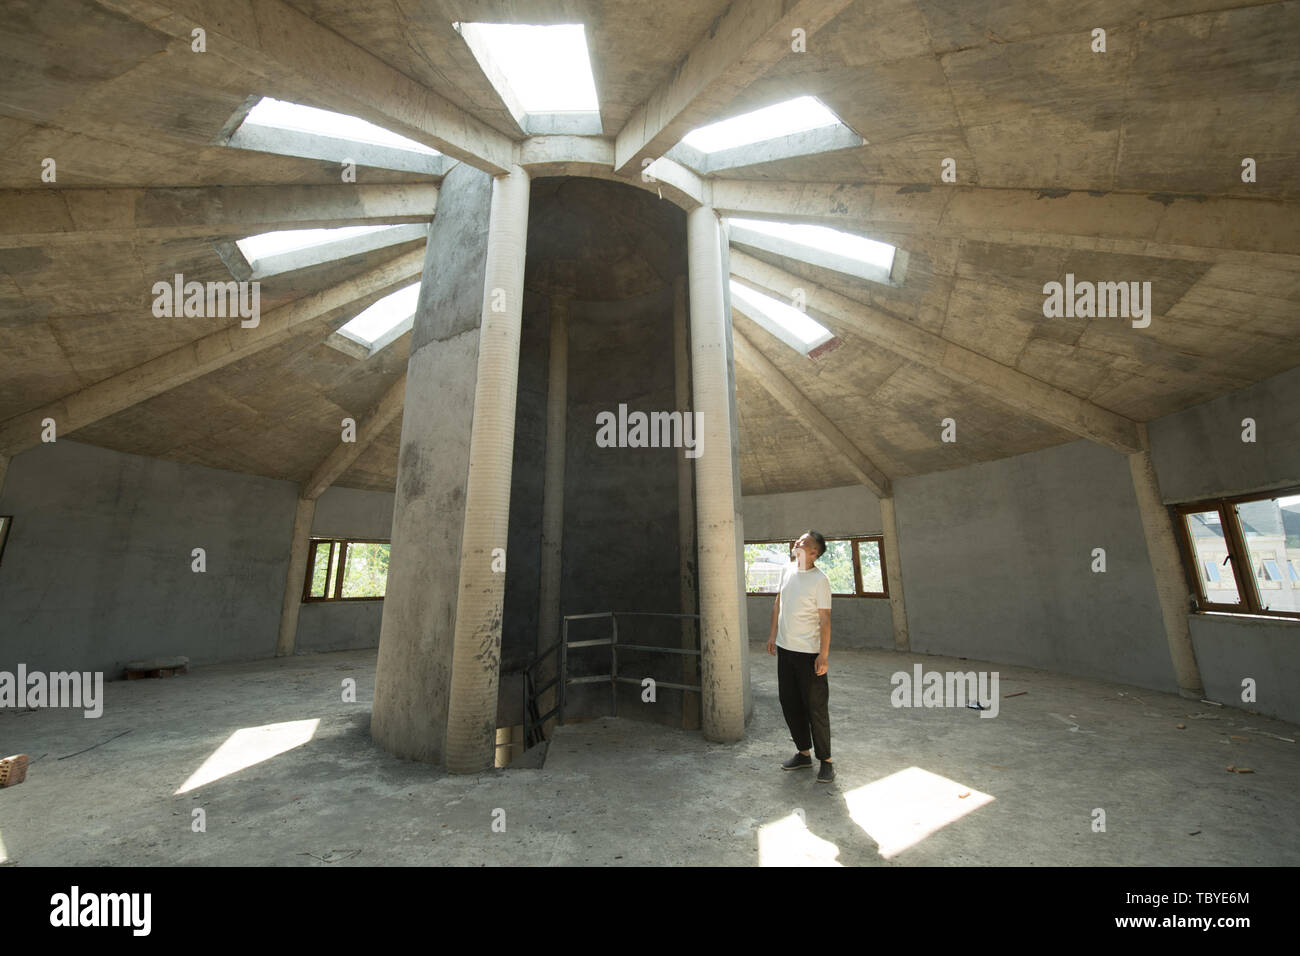 (190604) -- ANJI, June 4, 2019 (Xinhua) -- Photo taken on June 4, 2019 shows a library designed by Chen Gu in Anji, east China's Zhejiang Province. Chen Gu, born in 1971, has been working in design industry for more than 20 years. He started to re-design village houses after returning back to his hometown Anji. In 2014, Chen renovated a group of residential houses with the support of the local government. Since then, five guesthouses have been renovated and put into use. On his effort, the residential area once fallen has gradually become a guesthouse village equipped with accommodation, dinin Stock Photo